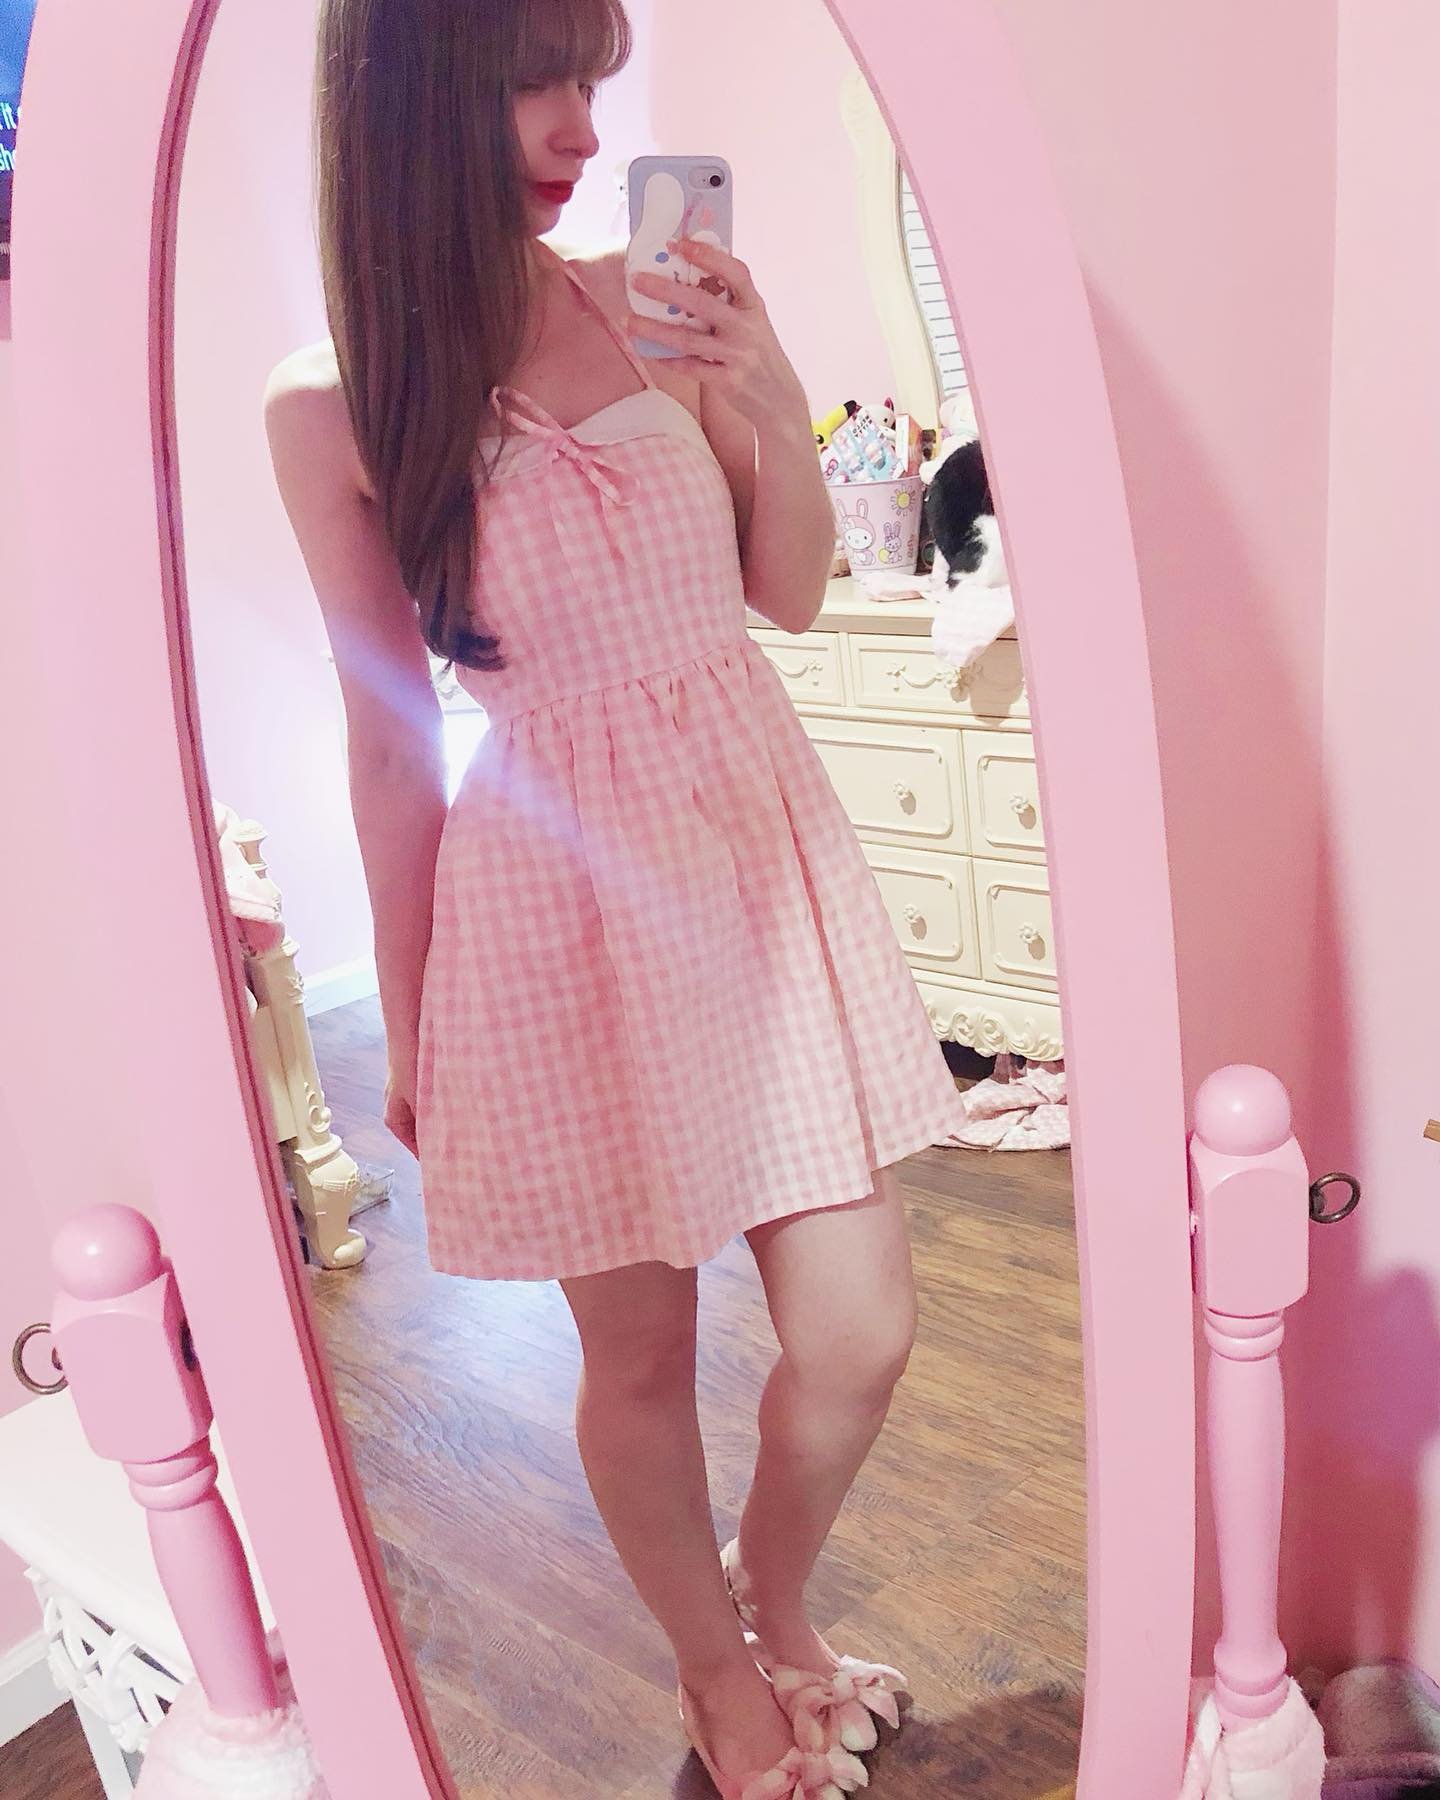 ˚˖𓍢ִ໋🌷͙֒✧˚.🎀༘⋆ Haven&rsquo;t worn this dress in forever! I just have two pounds to go till I reach my goal. I just feel so much more happy, healthier &amp; comfortable in my clothes since I lost my weight! Gosh, I&rsquo;m growing back my nails, lo